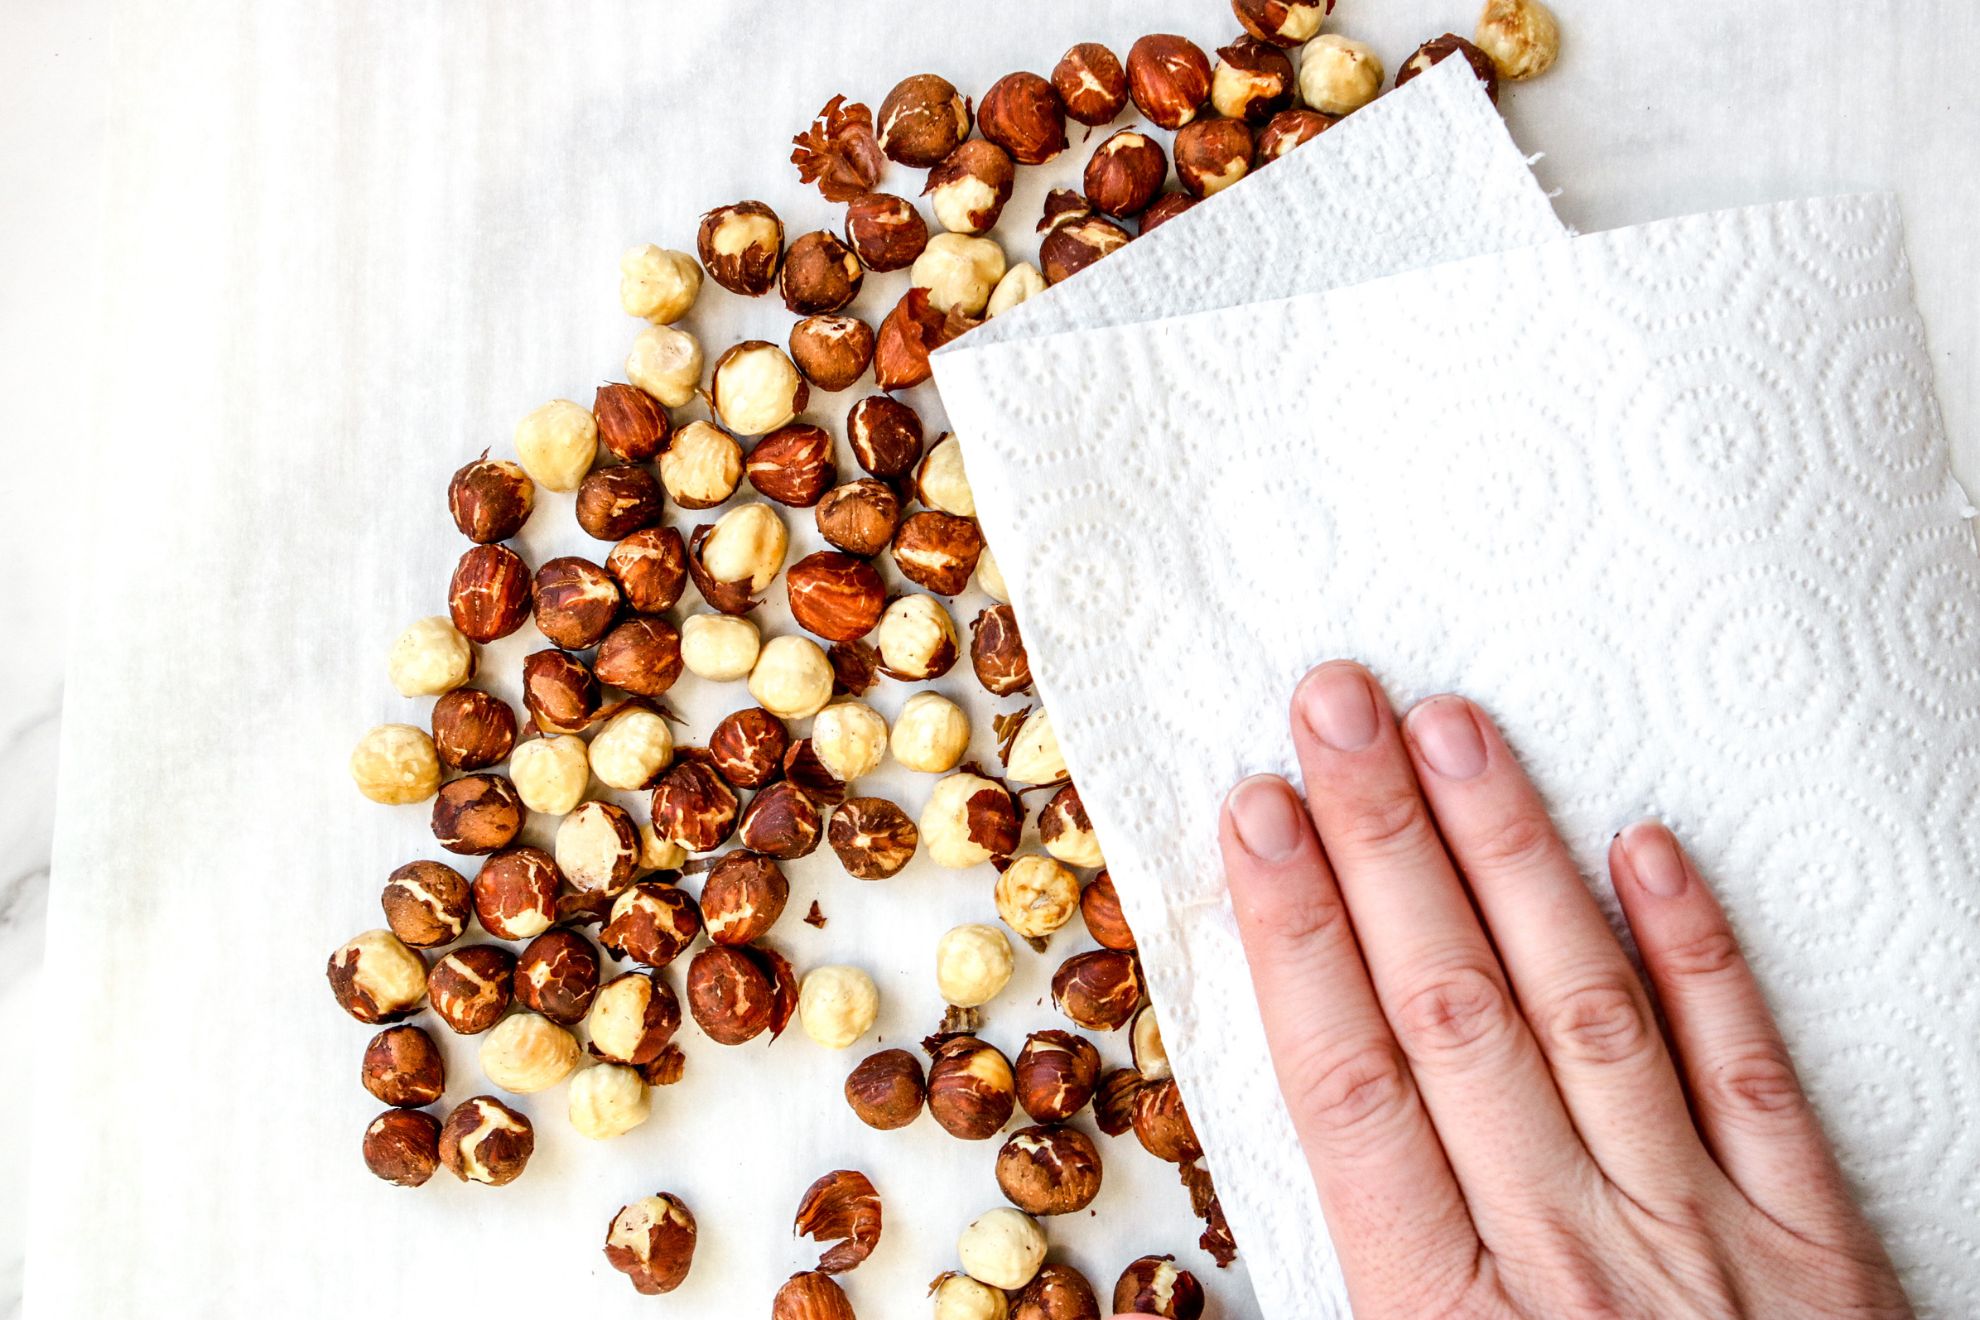 This is an overhead horizontal image of roasted hazelnuts on a white pieces of parchment paper. A hand is holding a paper towel on top of the hazelnuts to rub the skins off. 